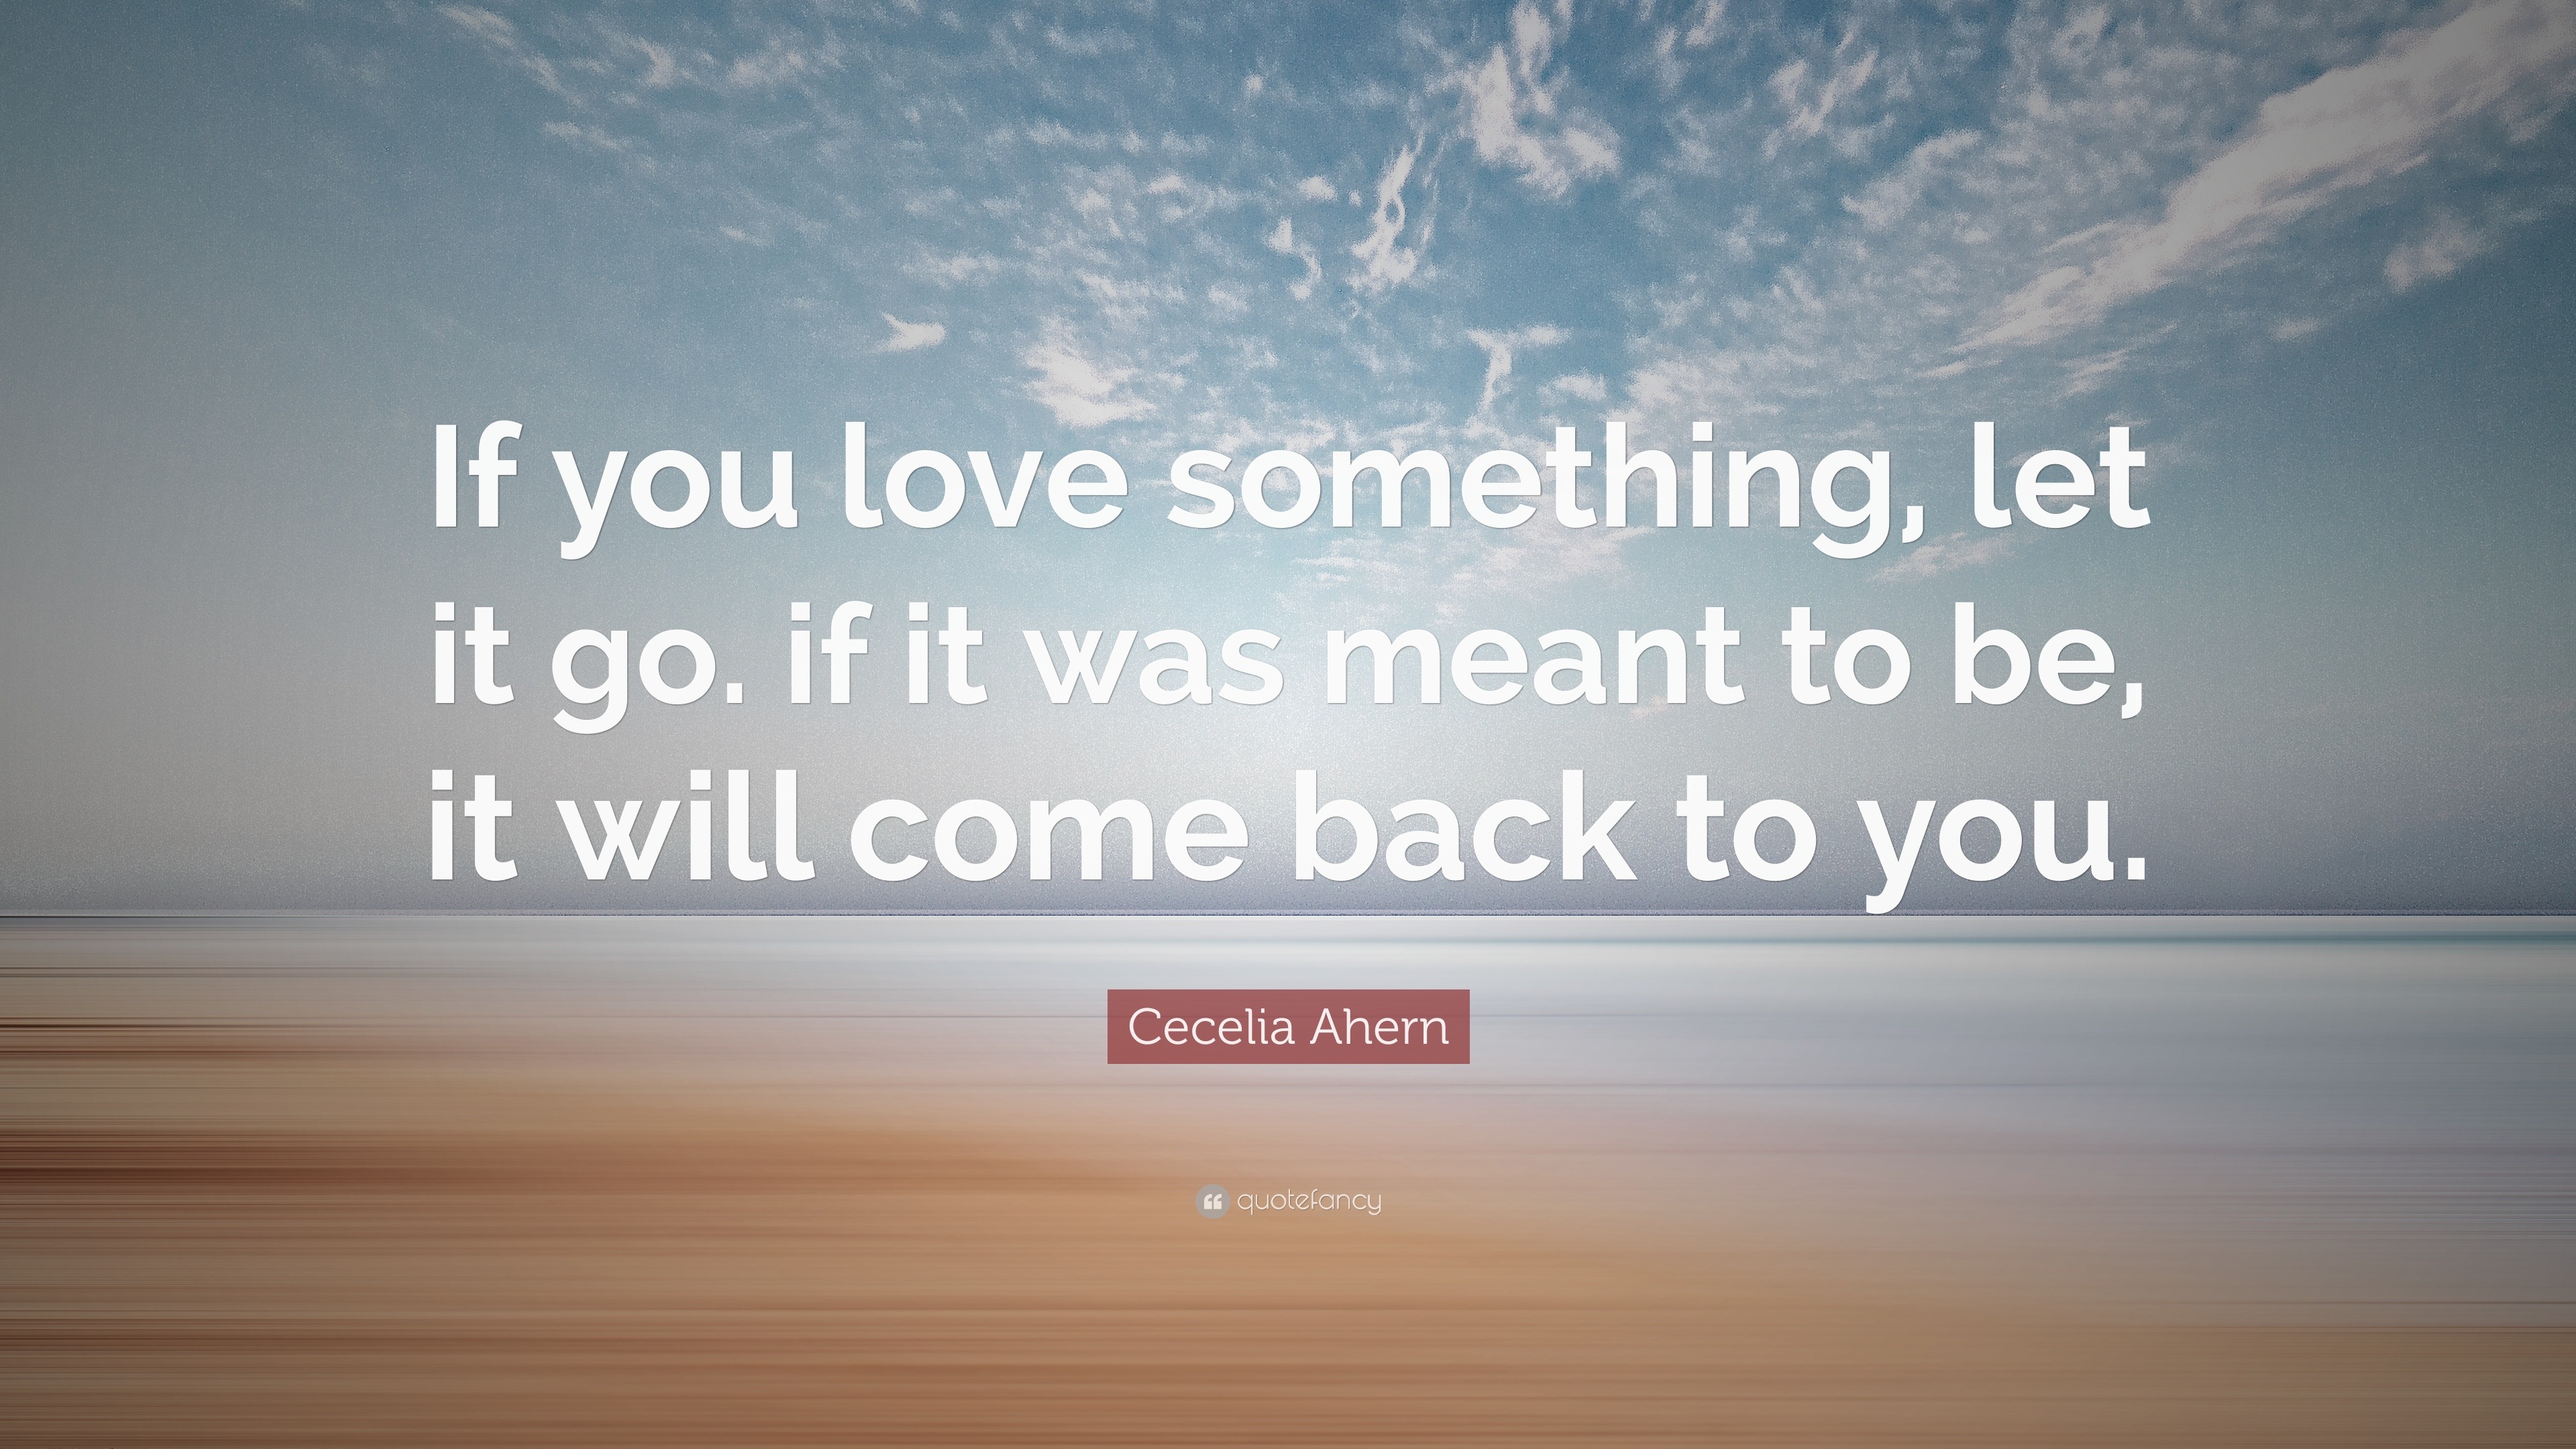 Cecelia Ahern Quote “If you love something let it go if it